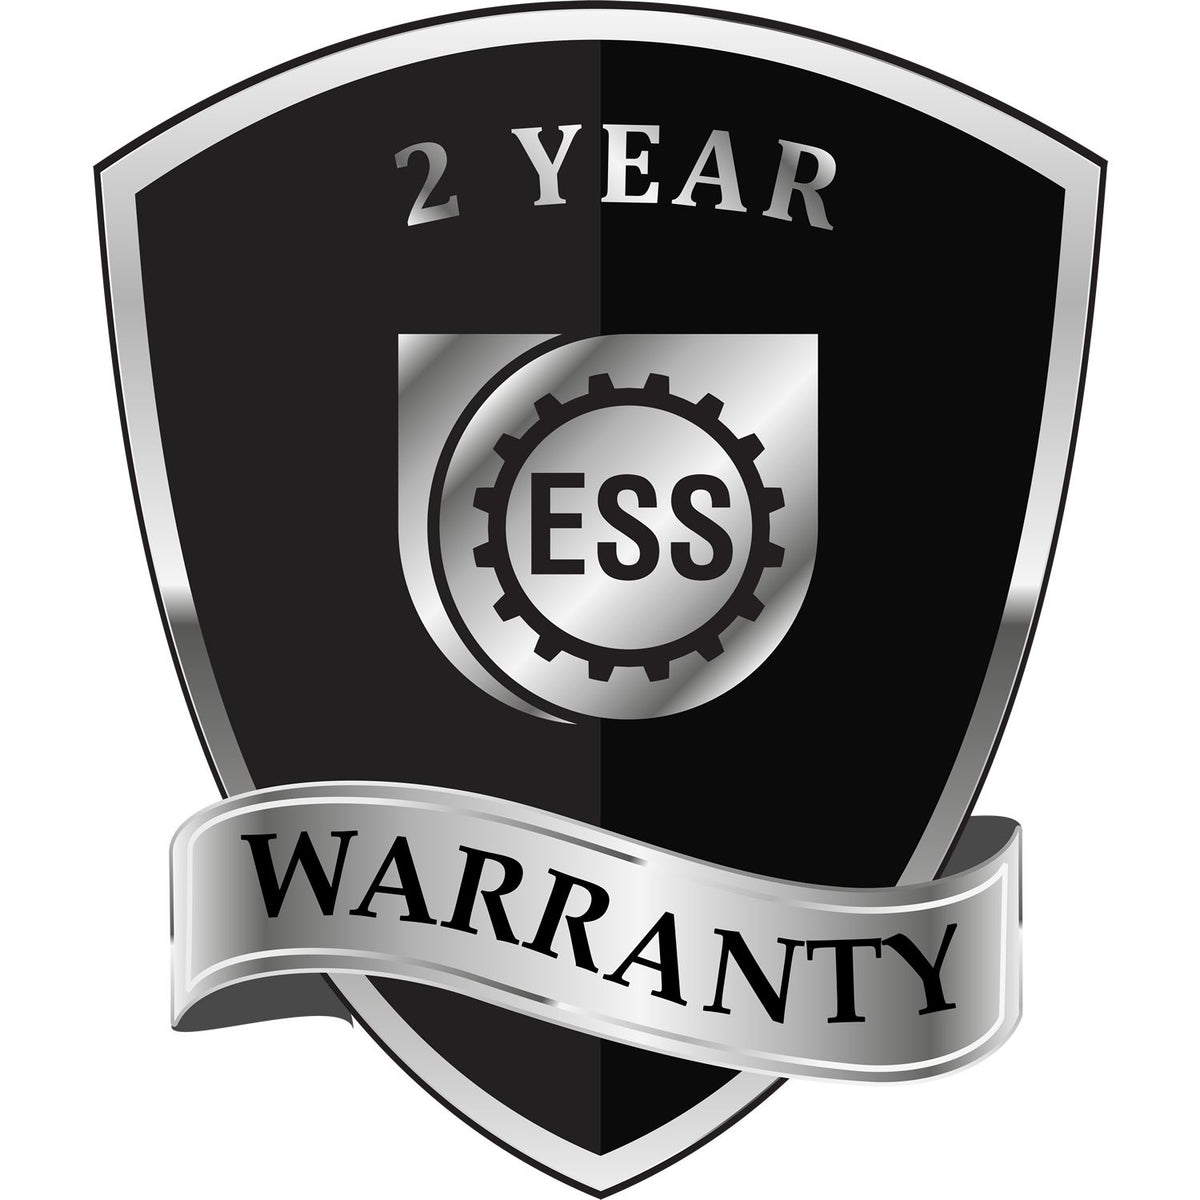 A black and silver badge or emblem showing warranty information for the Soft Hawaii Professional Geologist Seal